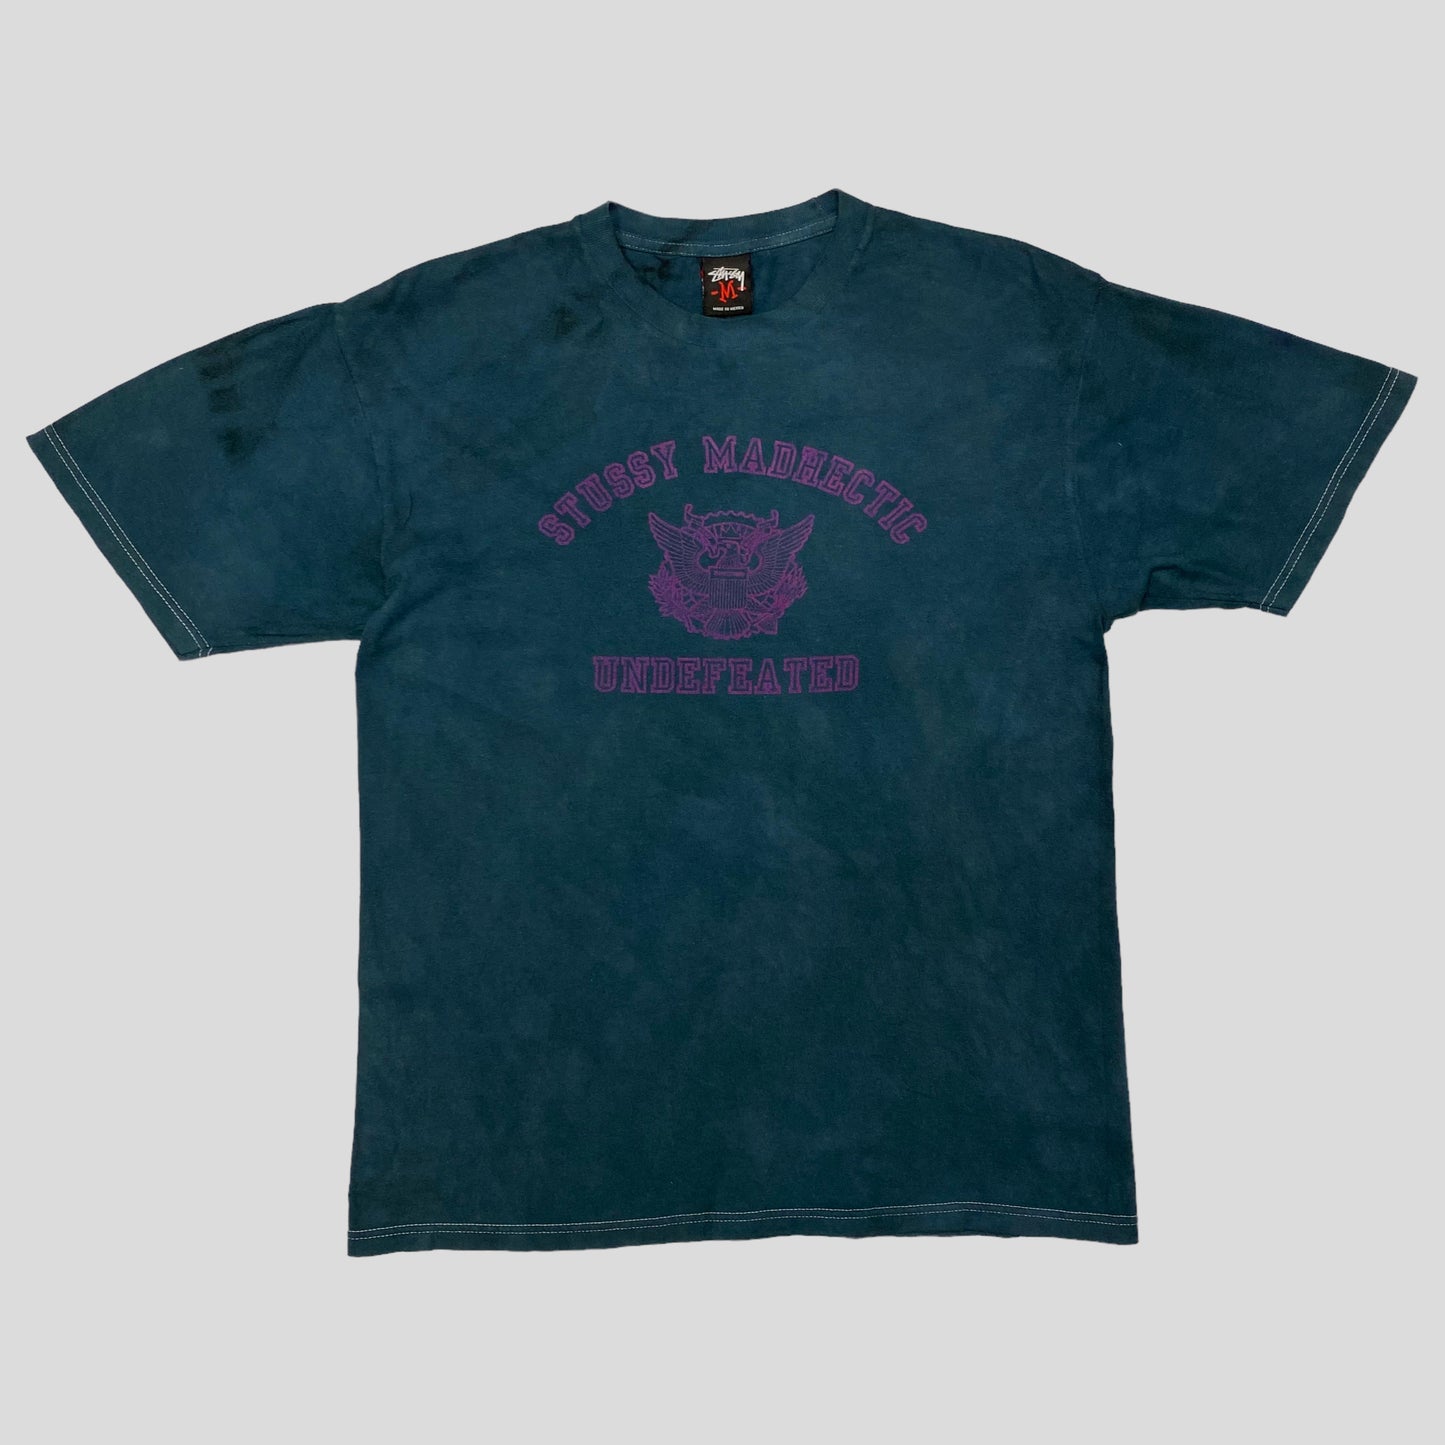 Stussy x UNDFTD x Mad Hectic ‘09 tee - M